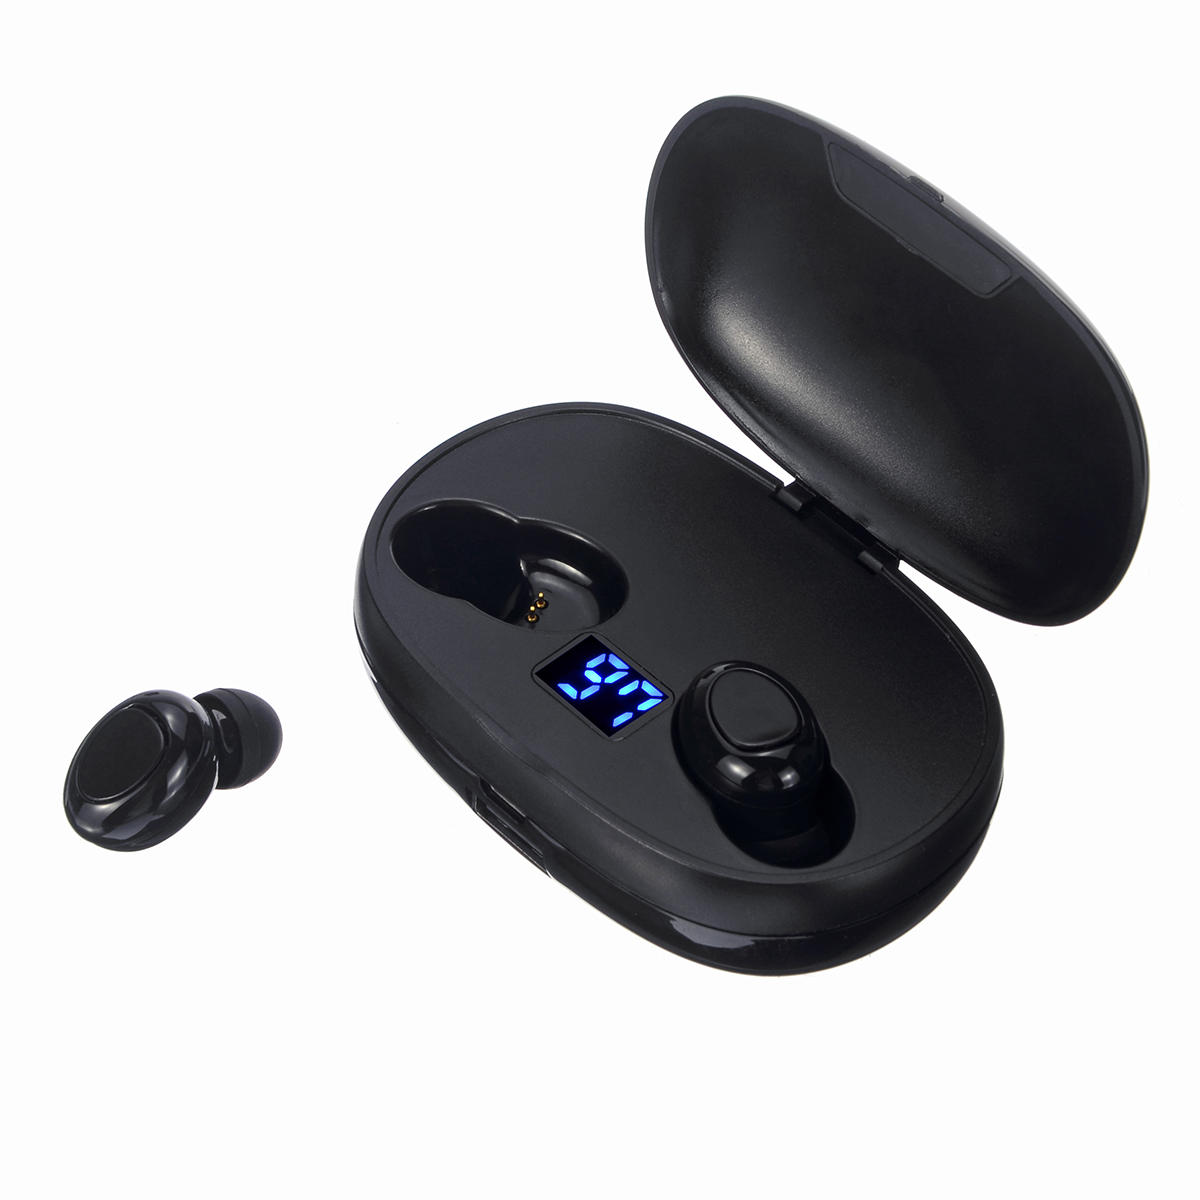 Dual Digital Display True Wireless Headset Button Touch bluetooth 5.0 Earphone with Portable Charging Box, Banggood  - buy with discount